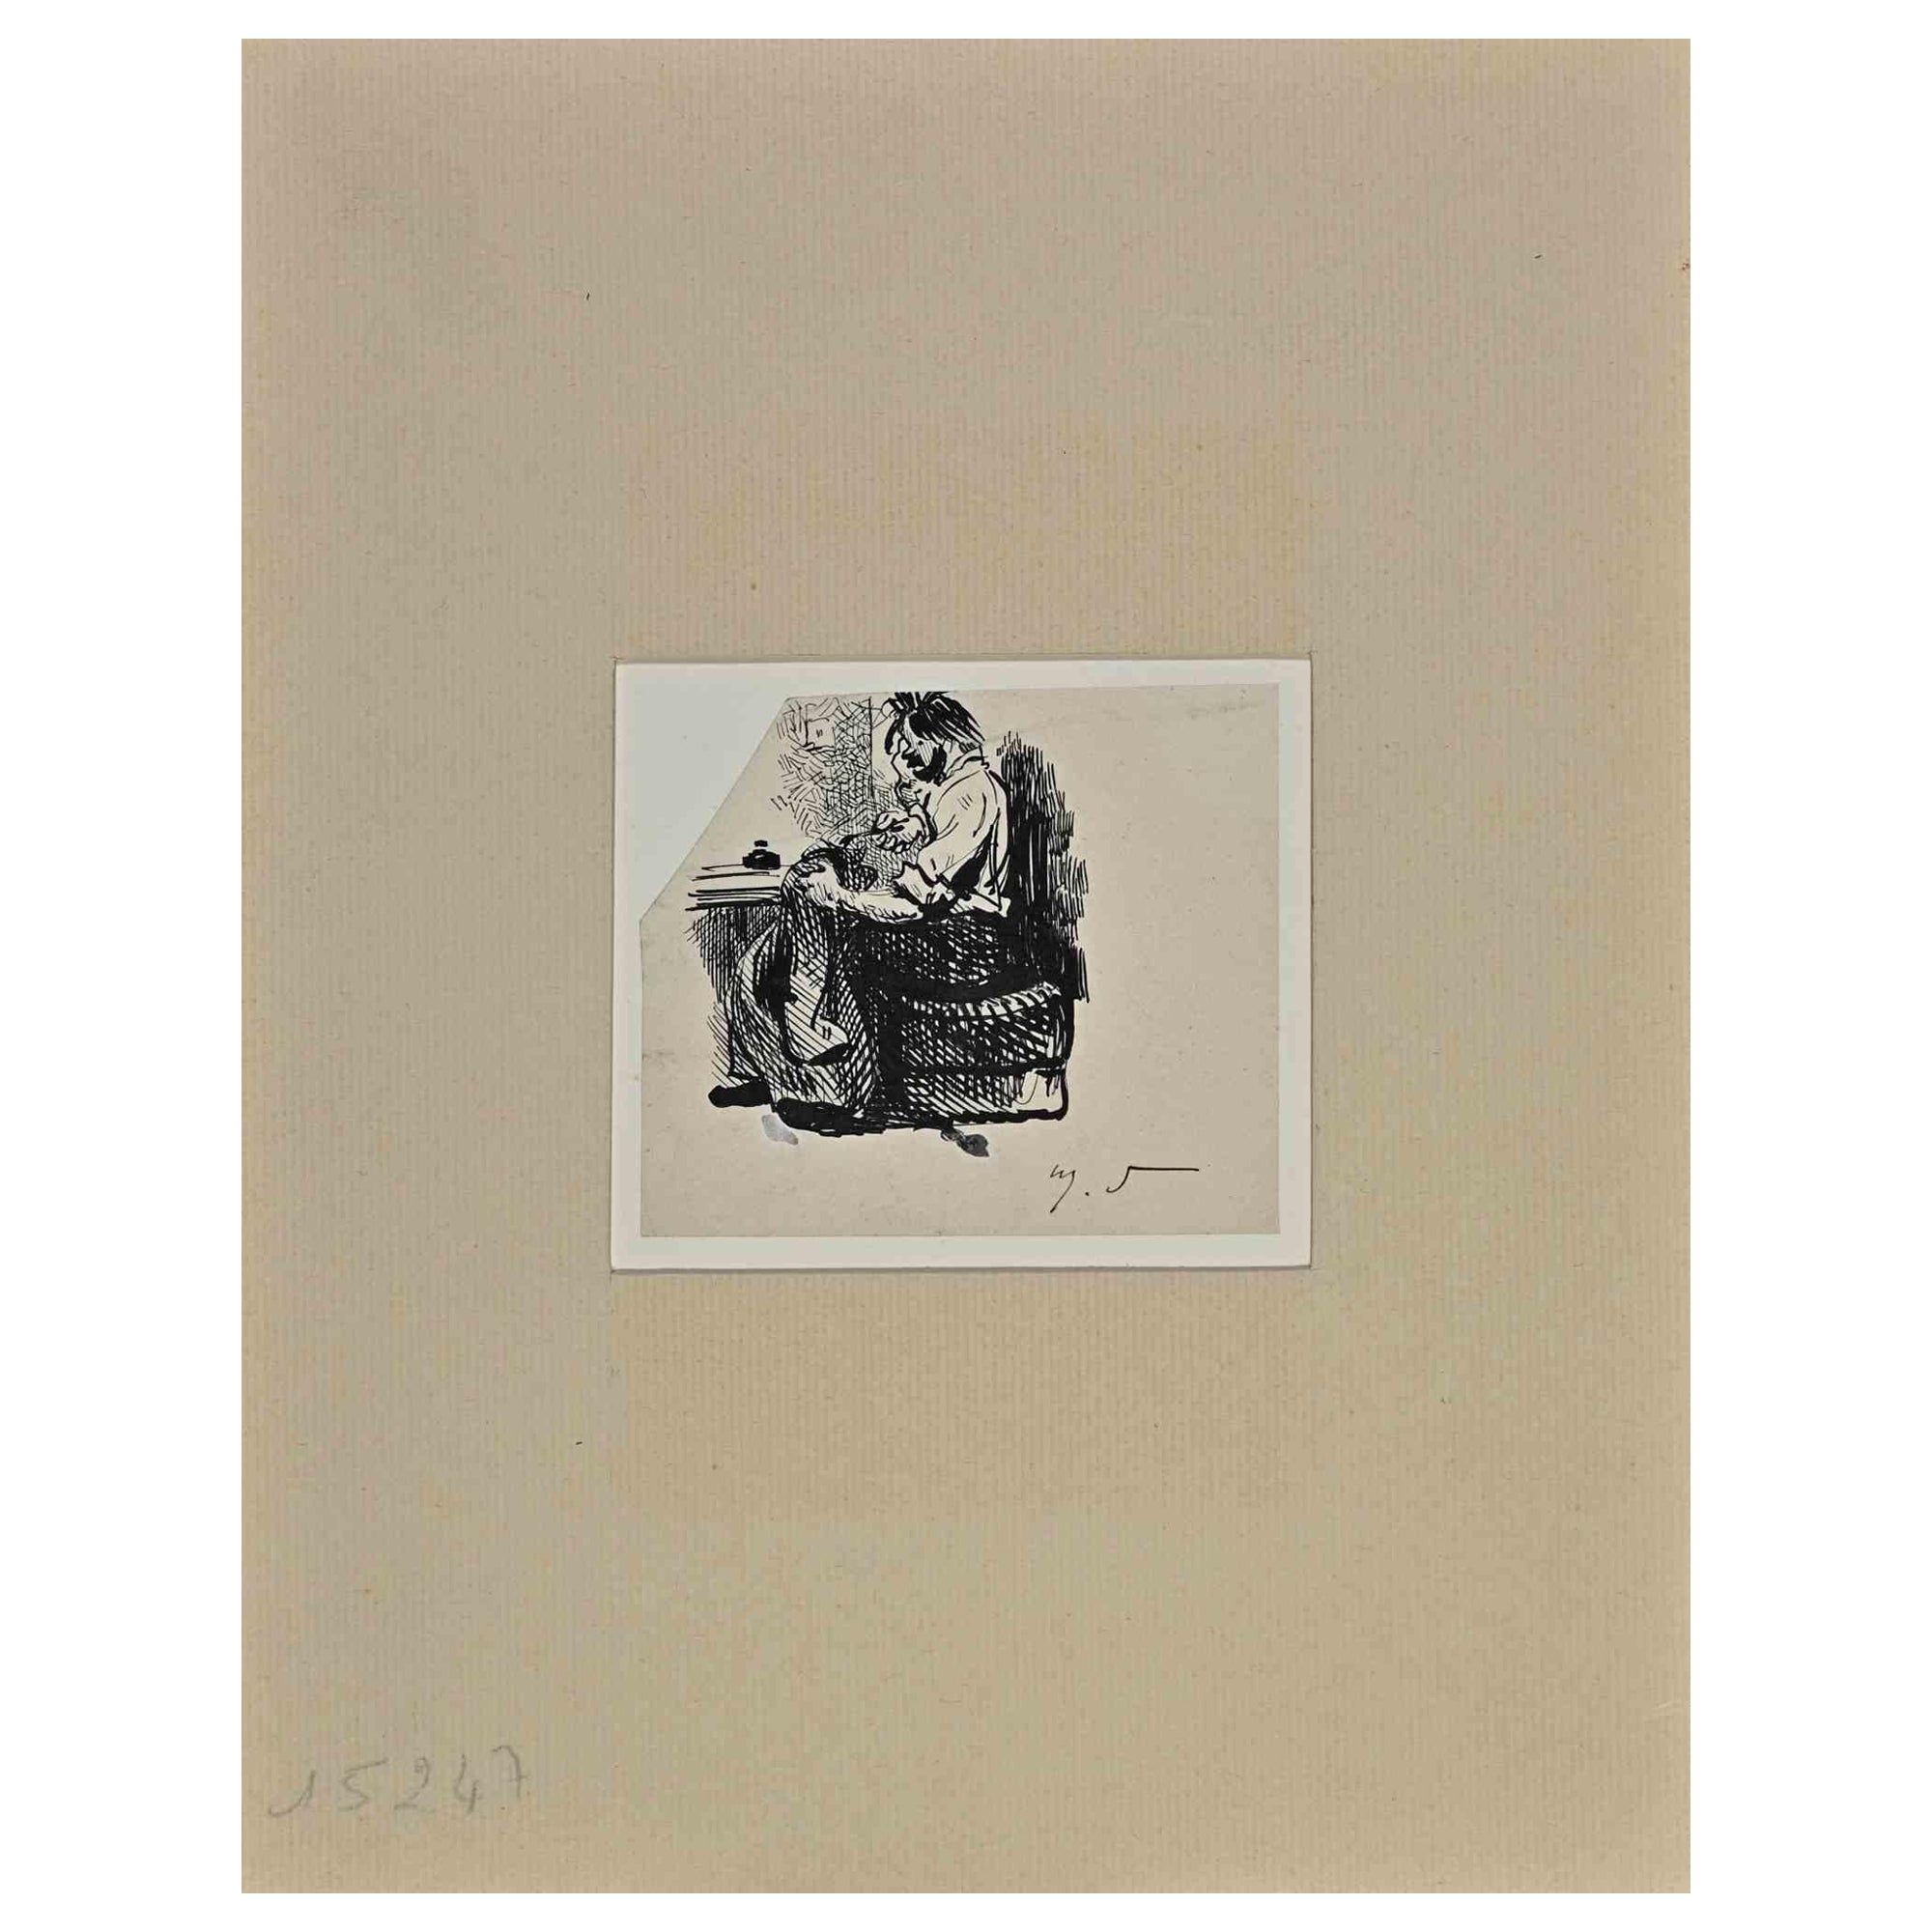 Man Working - Original Ink Drawing on Paper by H. Somm - Late 19th Century